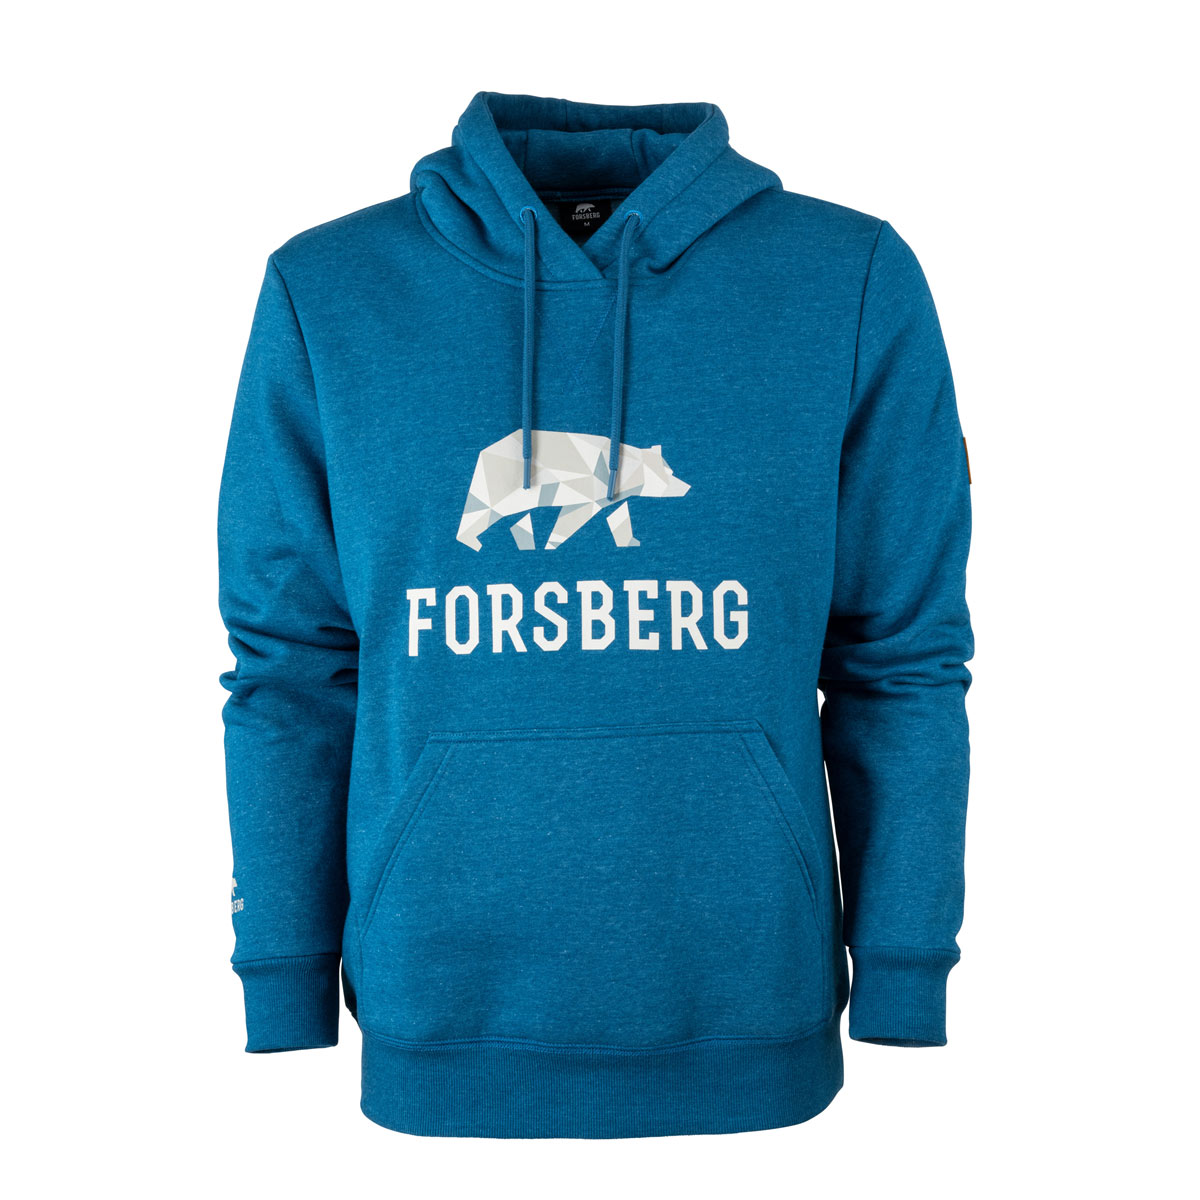 FORSBERG Hoodie with chest logo